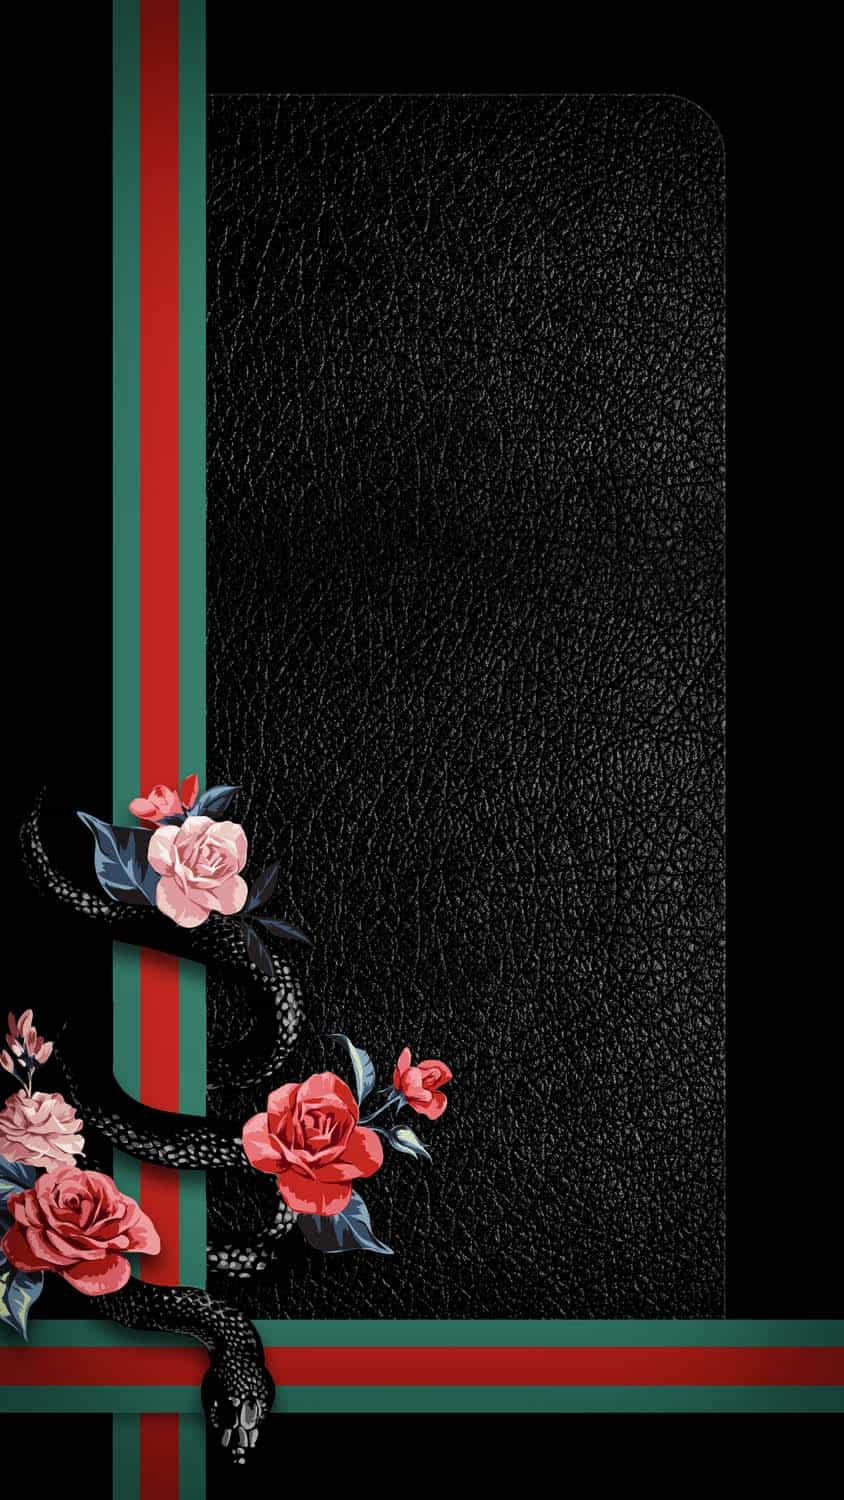 Gucci Leather IPhone Wallpaper HD  IPhone Wallpapers